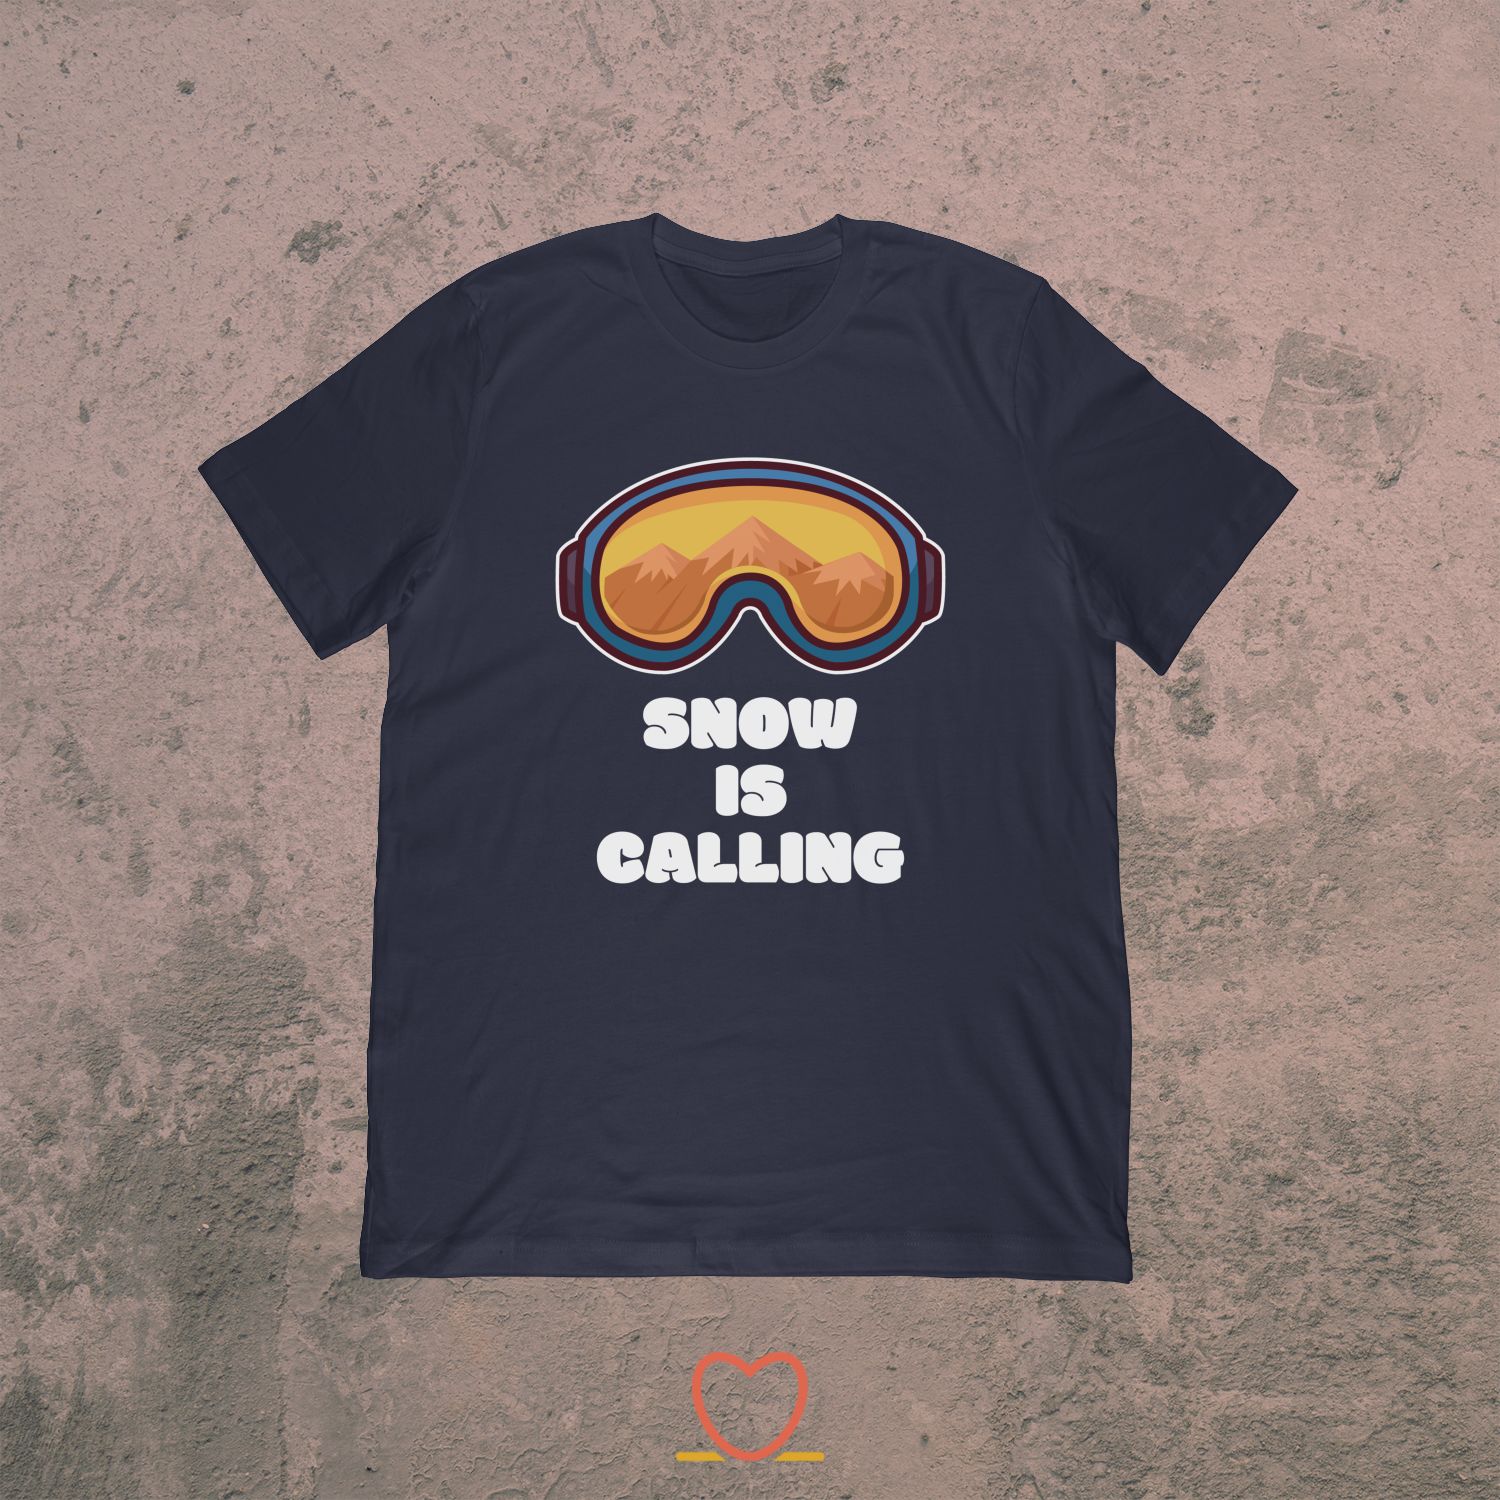 Snow Is Calling – Let’s Go Skiing Tee